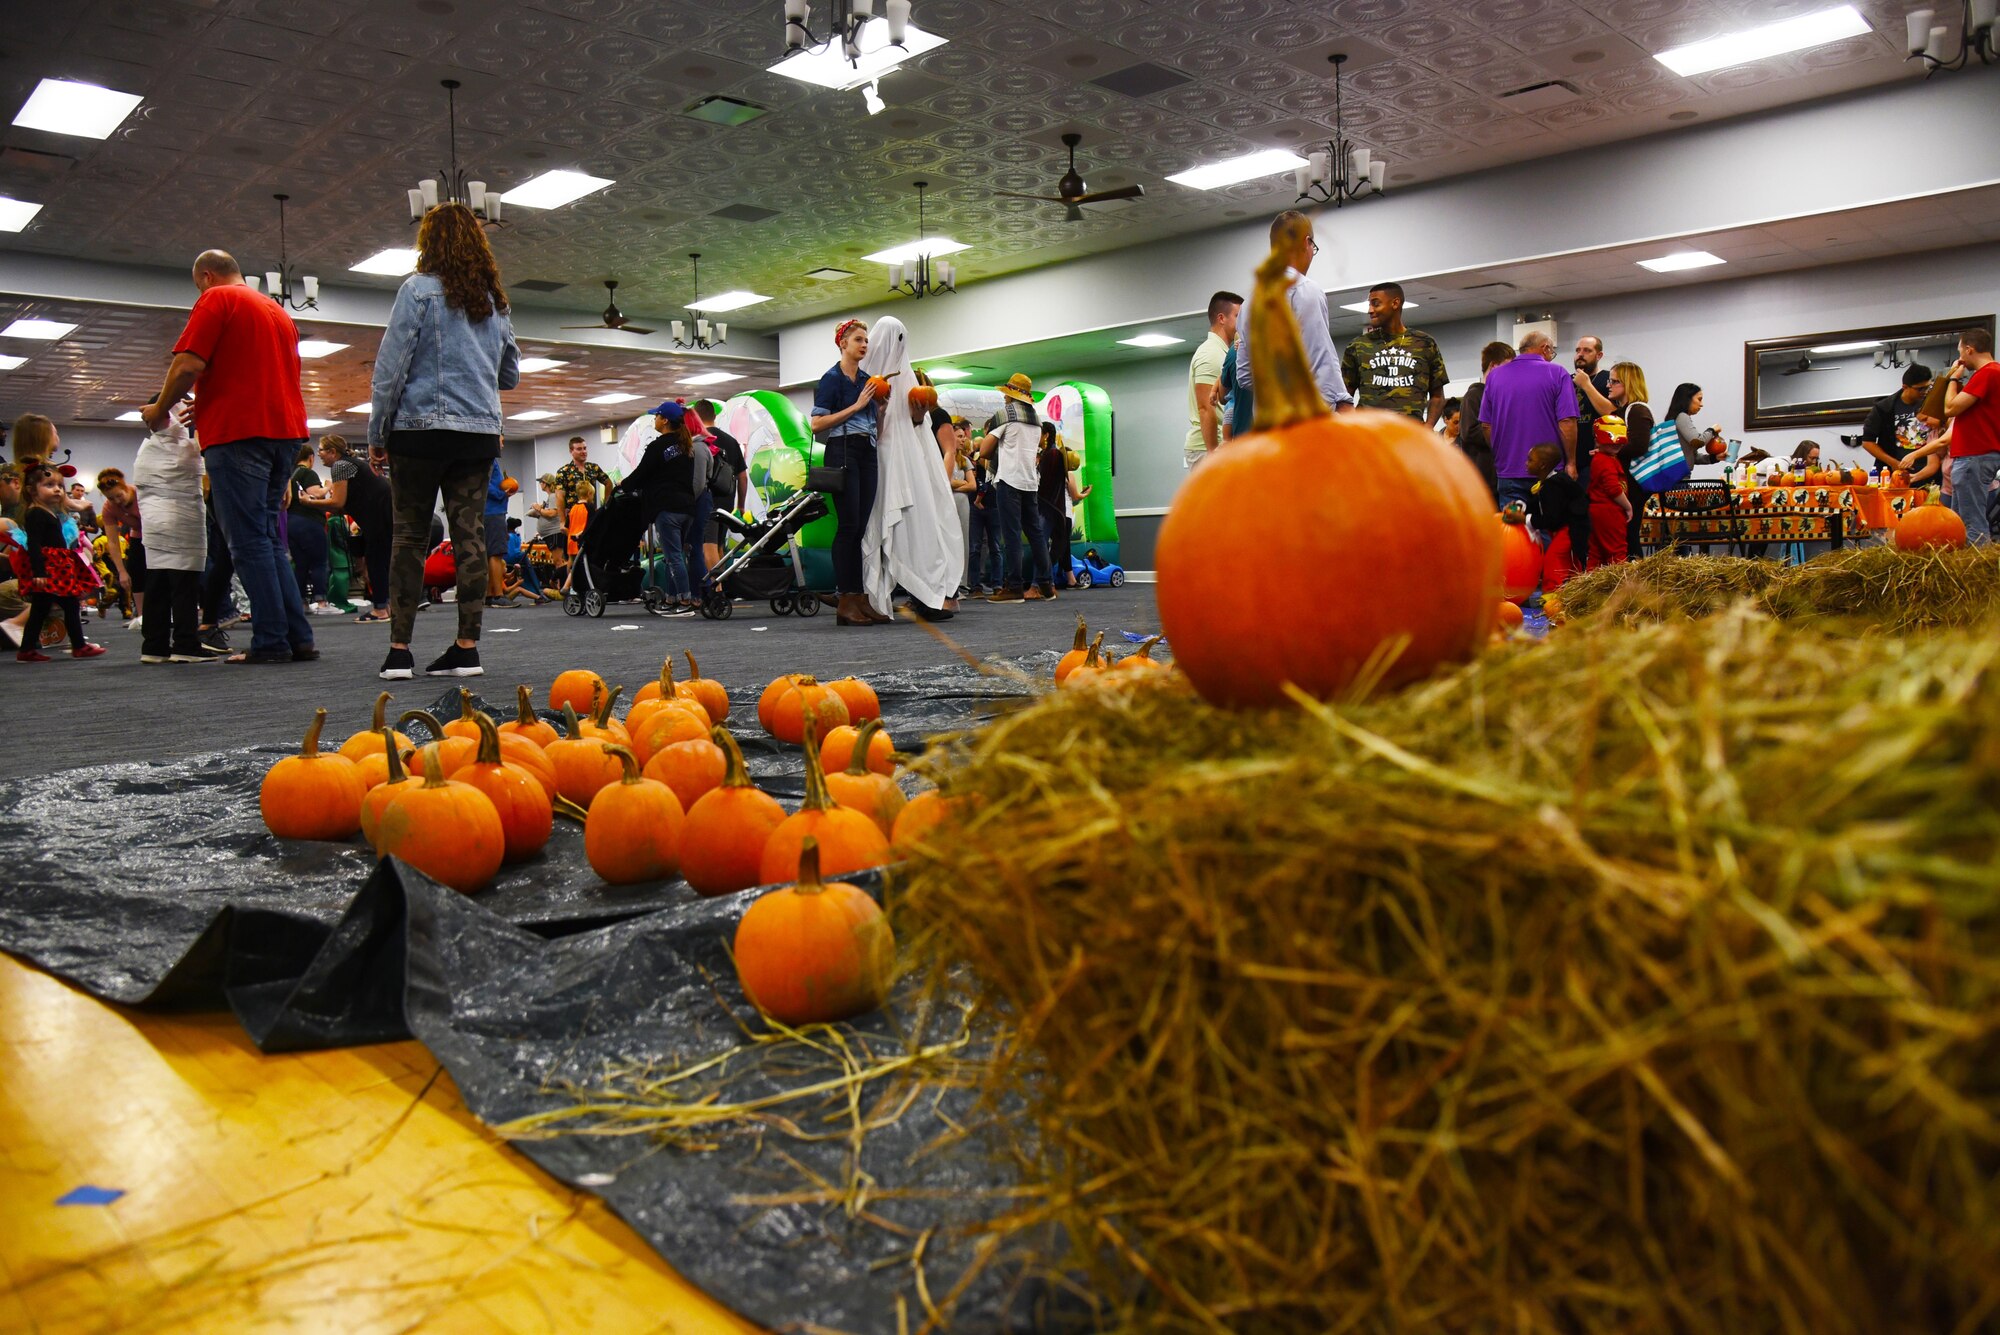 Attendees walk around a pumpkin patch during Boo Fest at the Club Oct. 26, 2019, on Columbus Air Force Base, Miss. According to Guinness World Records, the highest number of lit jack o’ lanterns on display is 30,581 by the City of Keene, New Hampshire in 2013.  (U.S. Air Force photo by Airman 1st Class Jake Jacobsen)